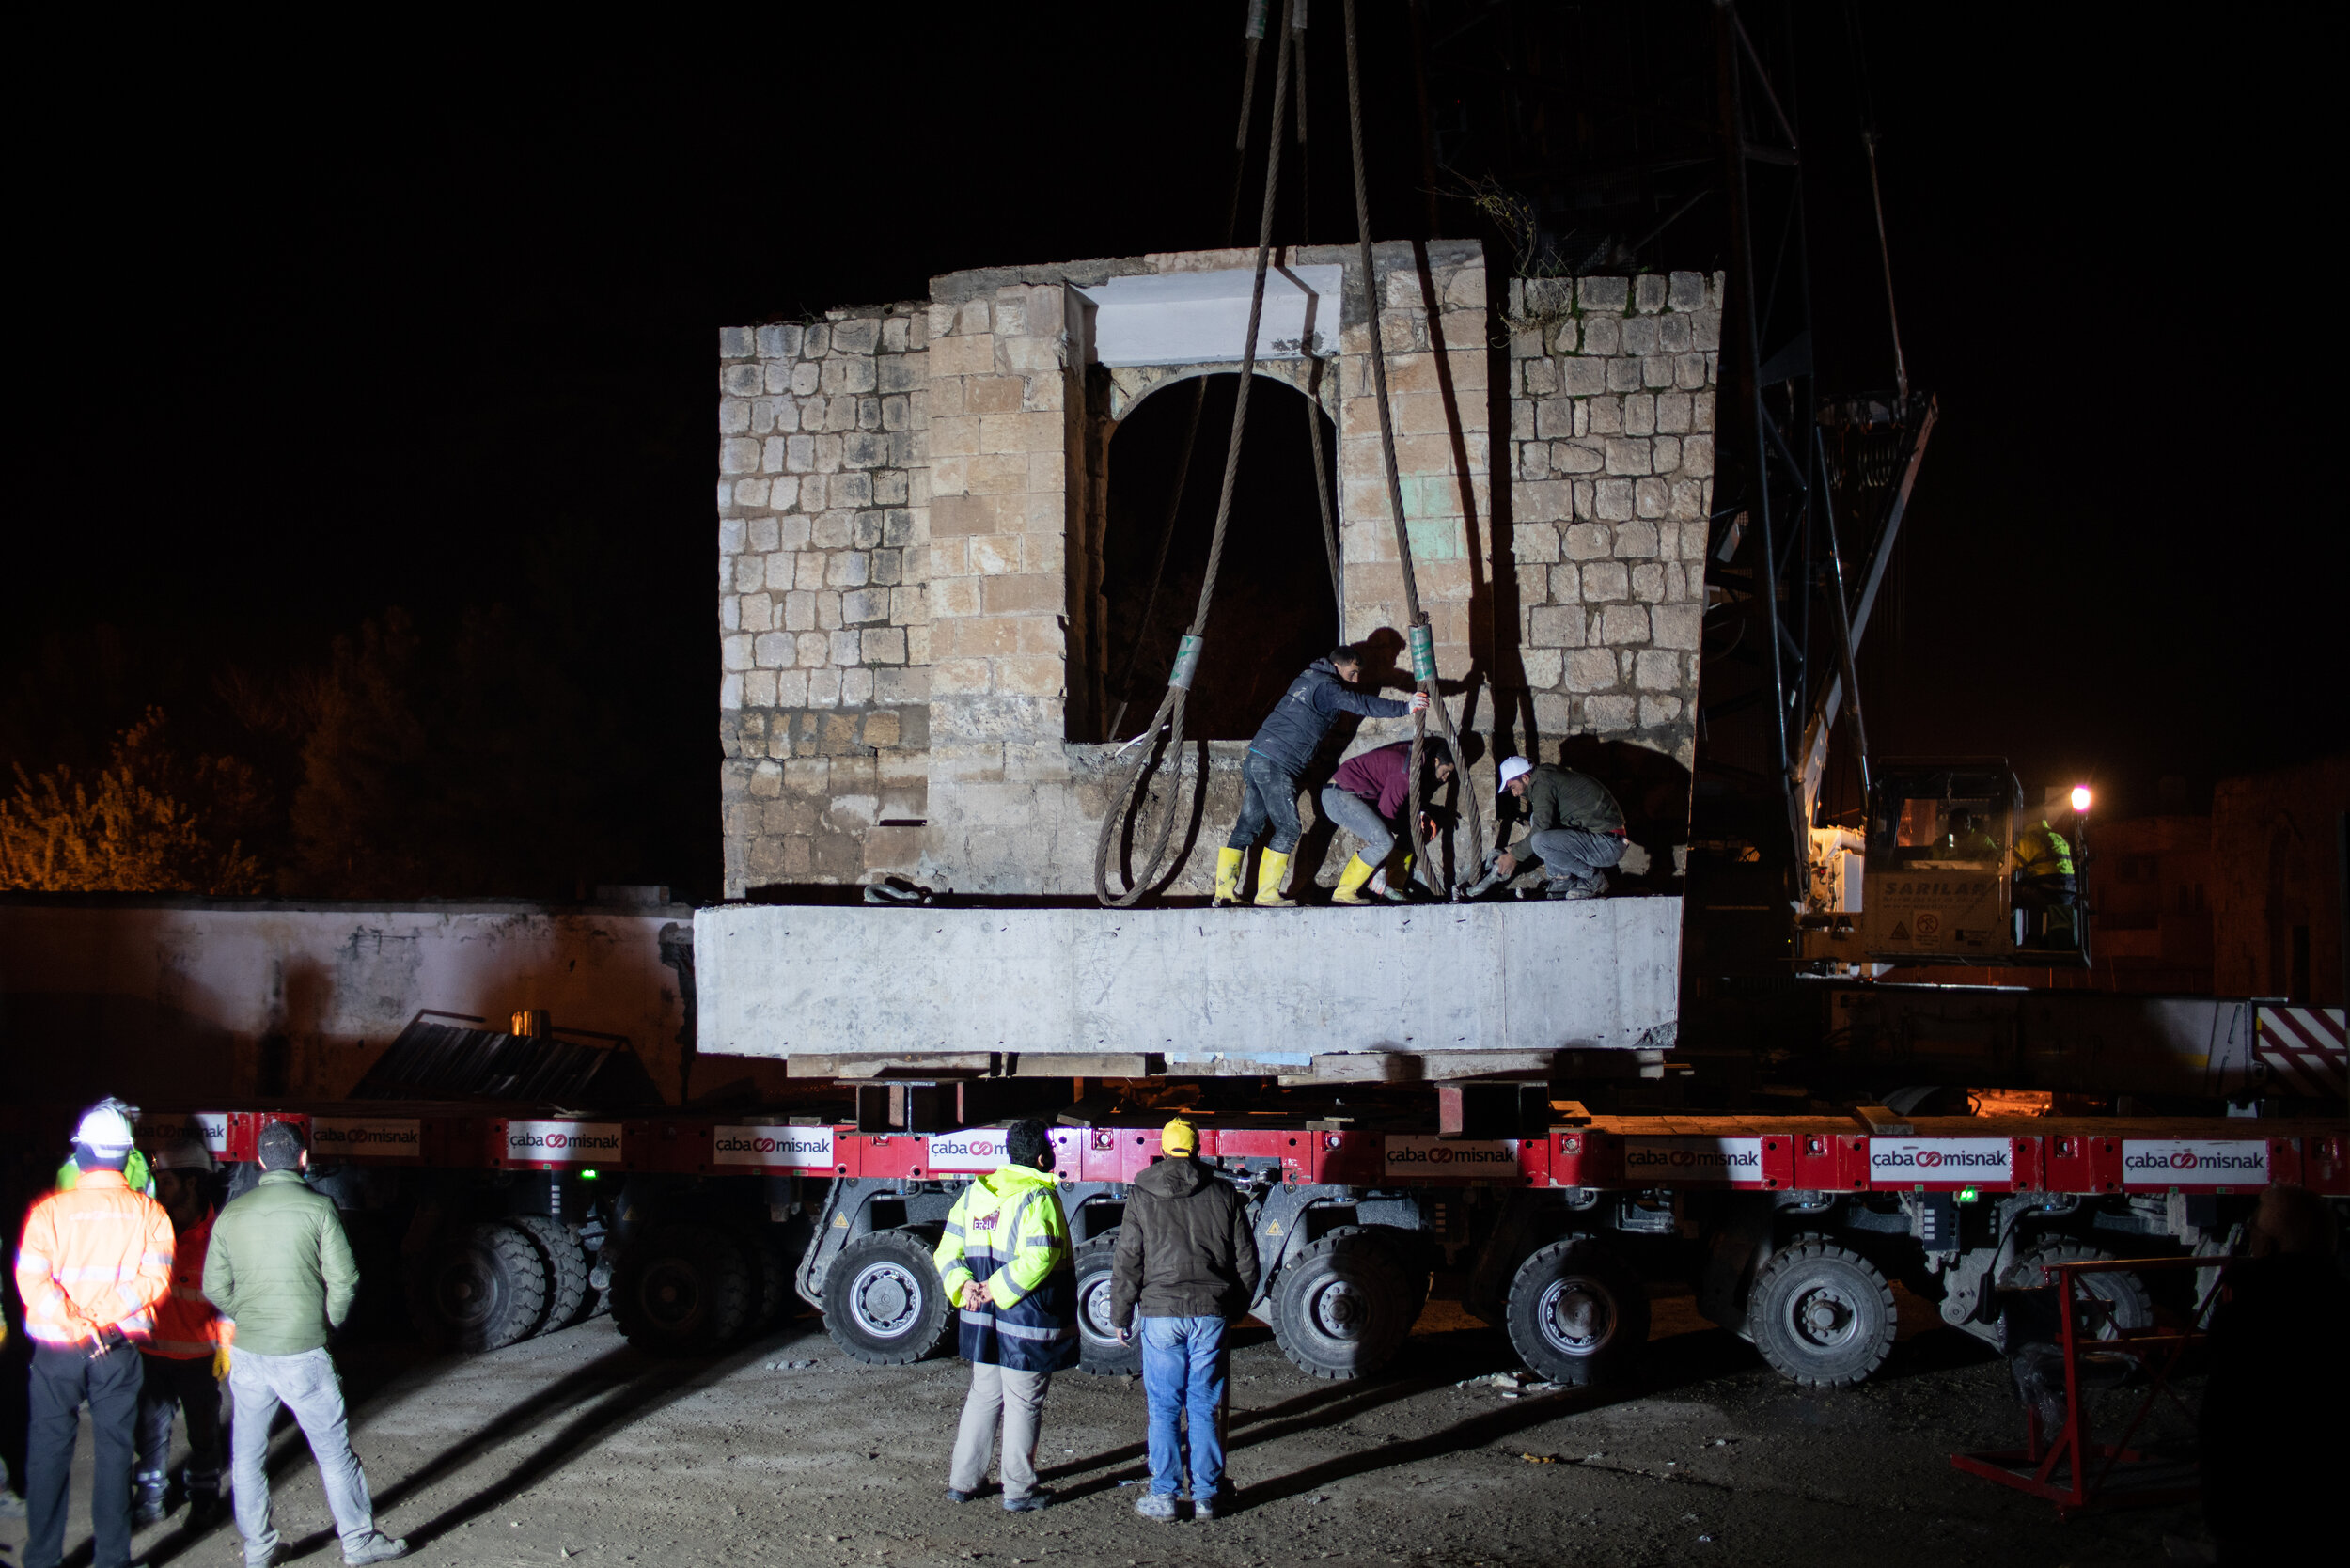 The walls of Kizlar Mosque are lifted onto a tracked trailer to be moved across the Tigris before dawn.